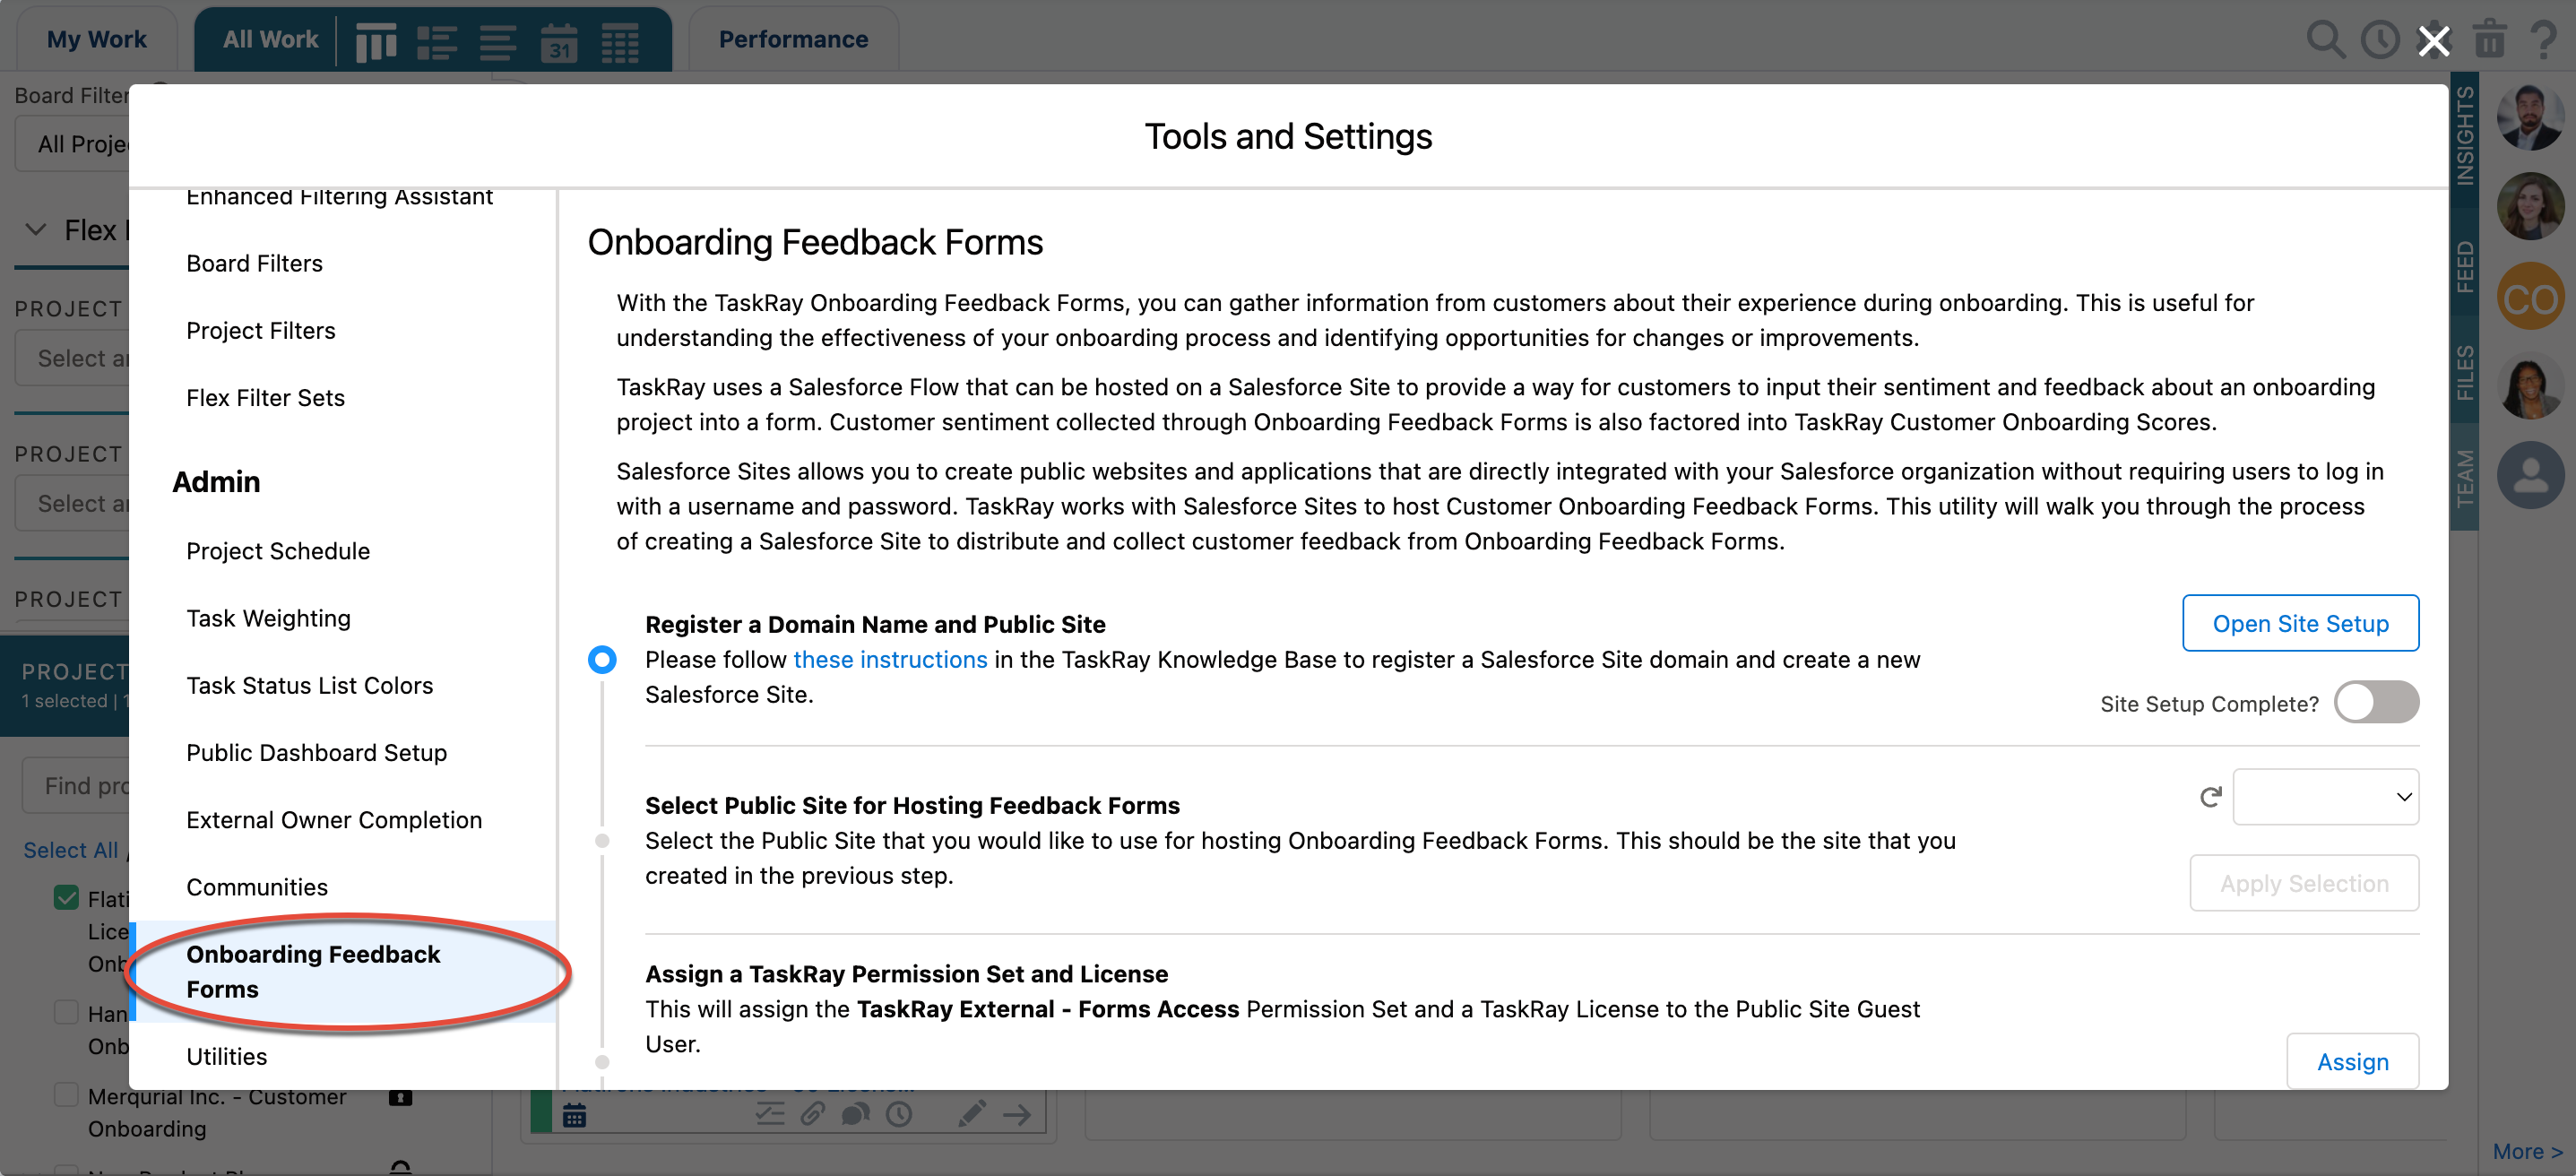 feedback-forms-utility.png